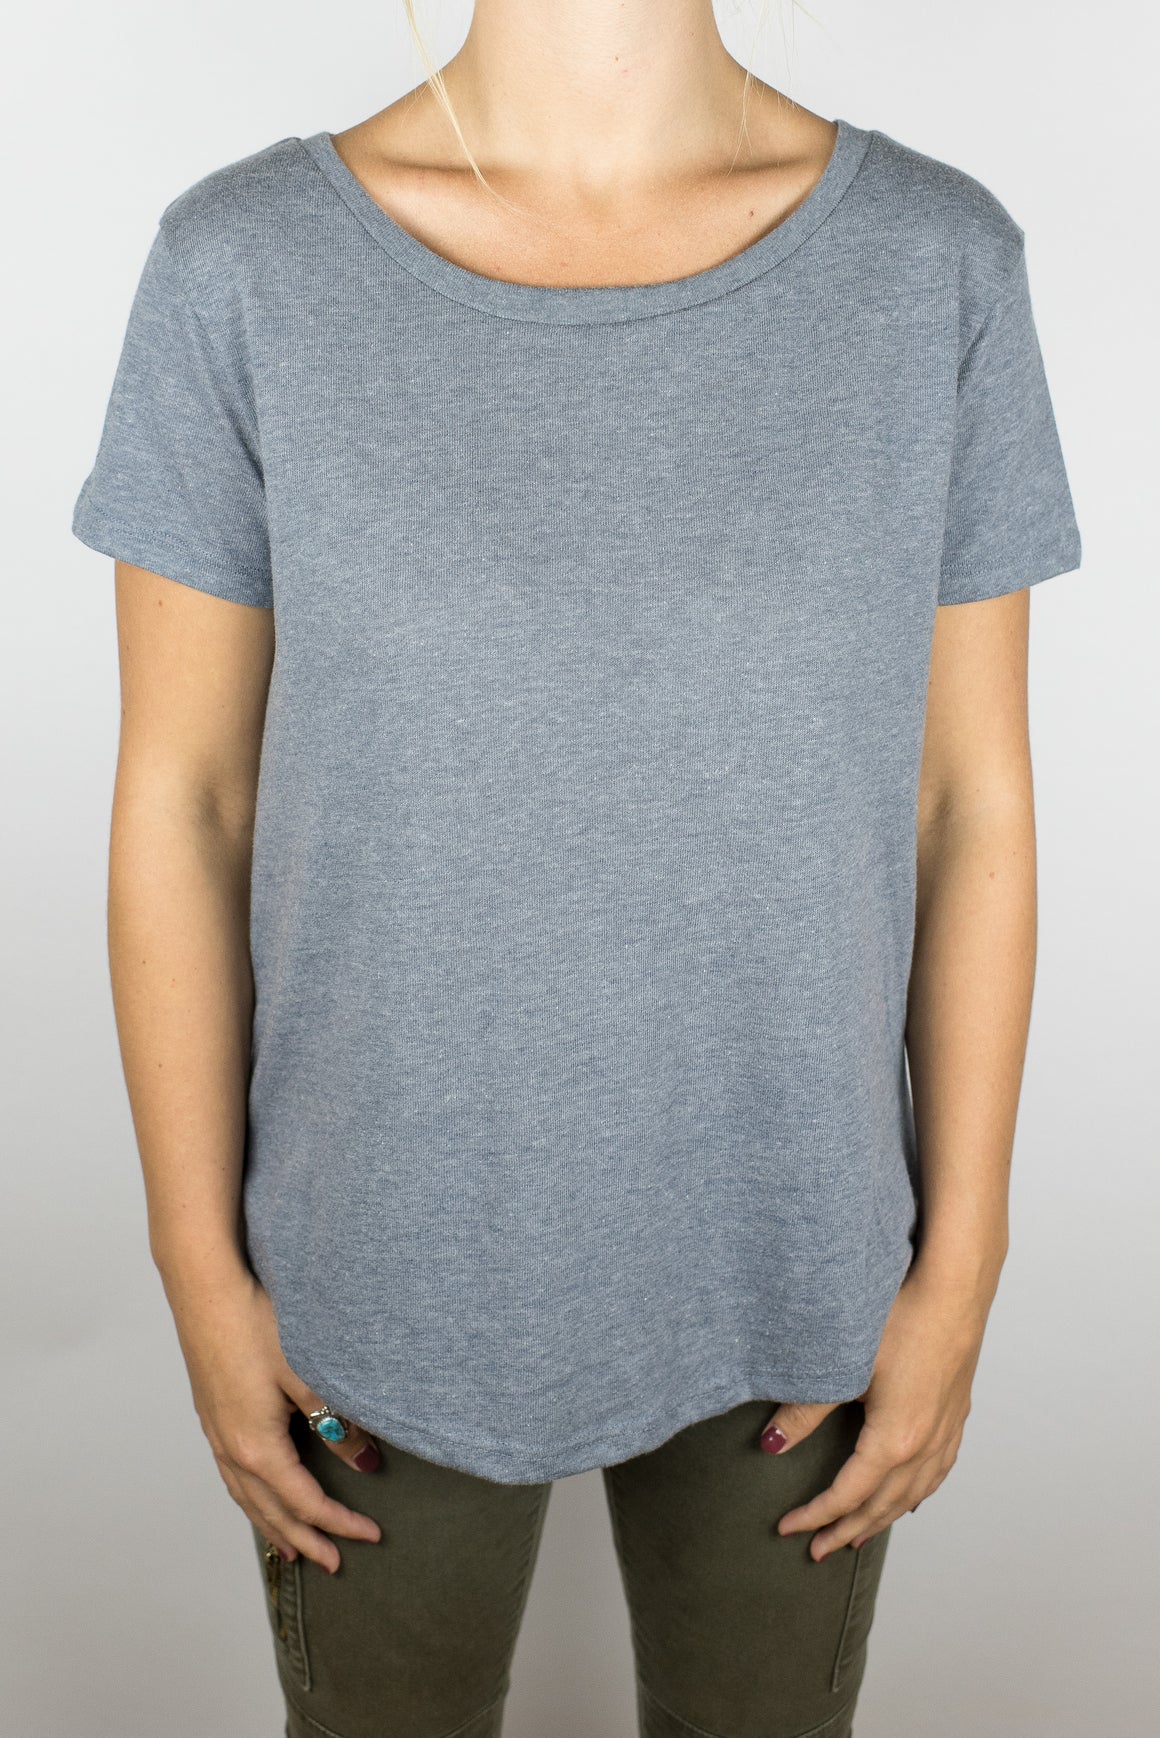 The Flare Tee in Cool Vintage Grey